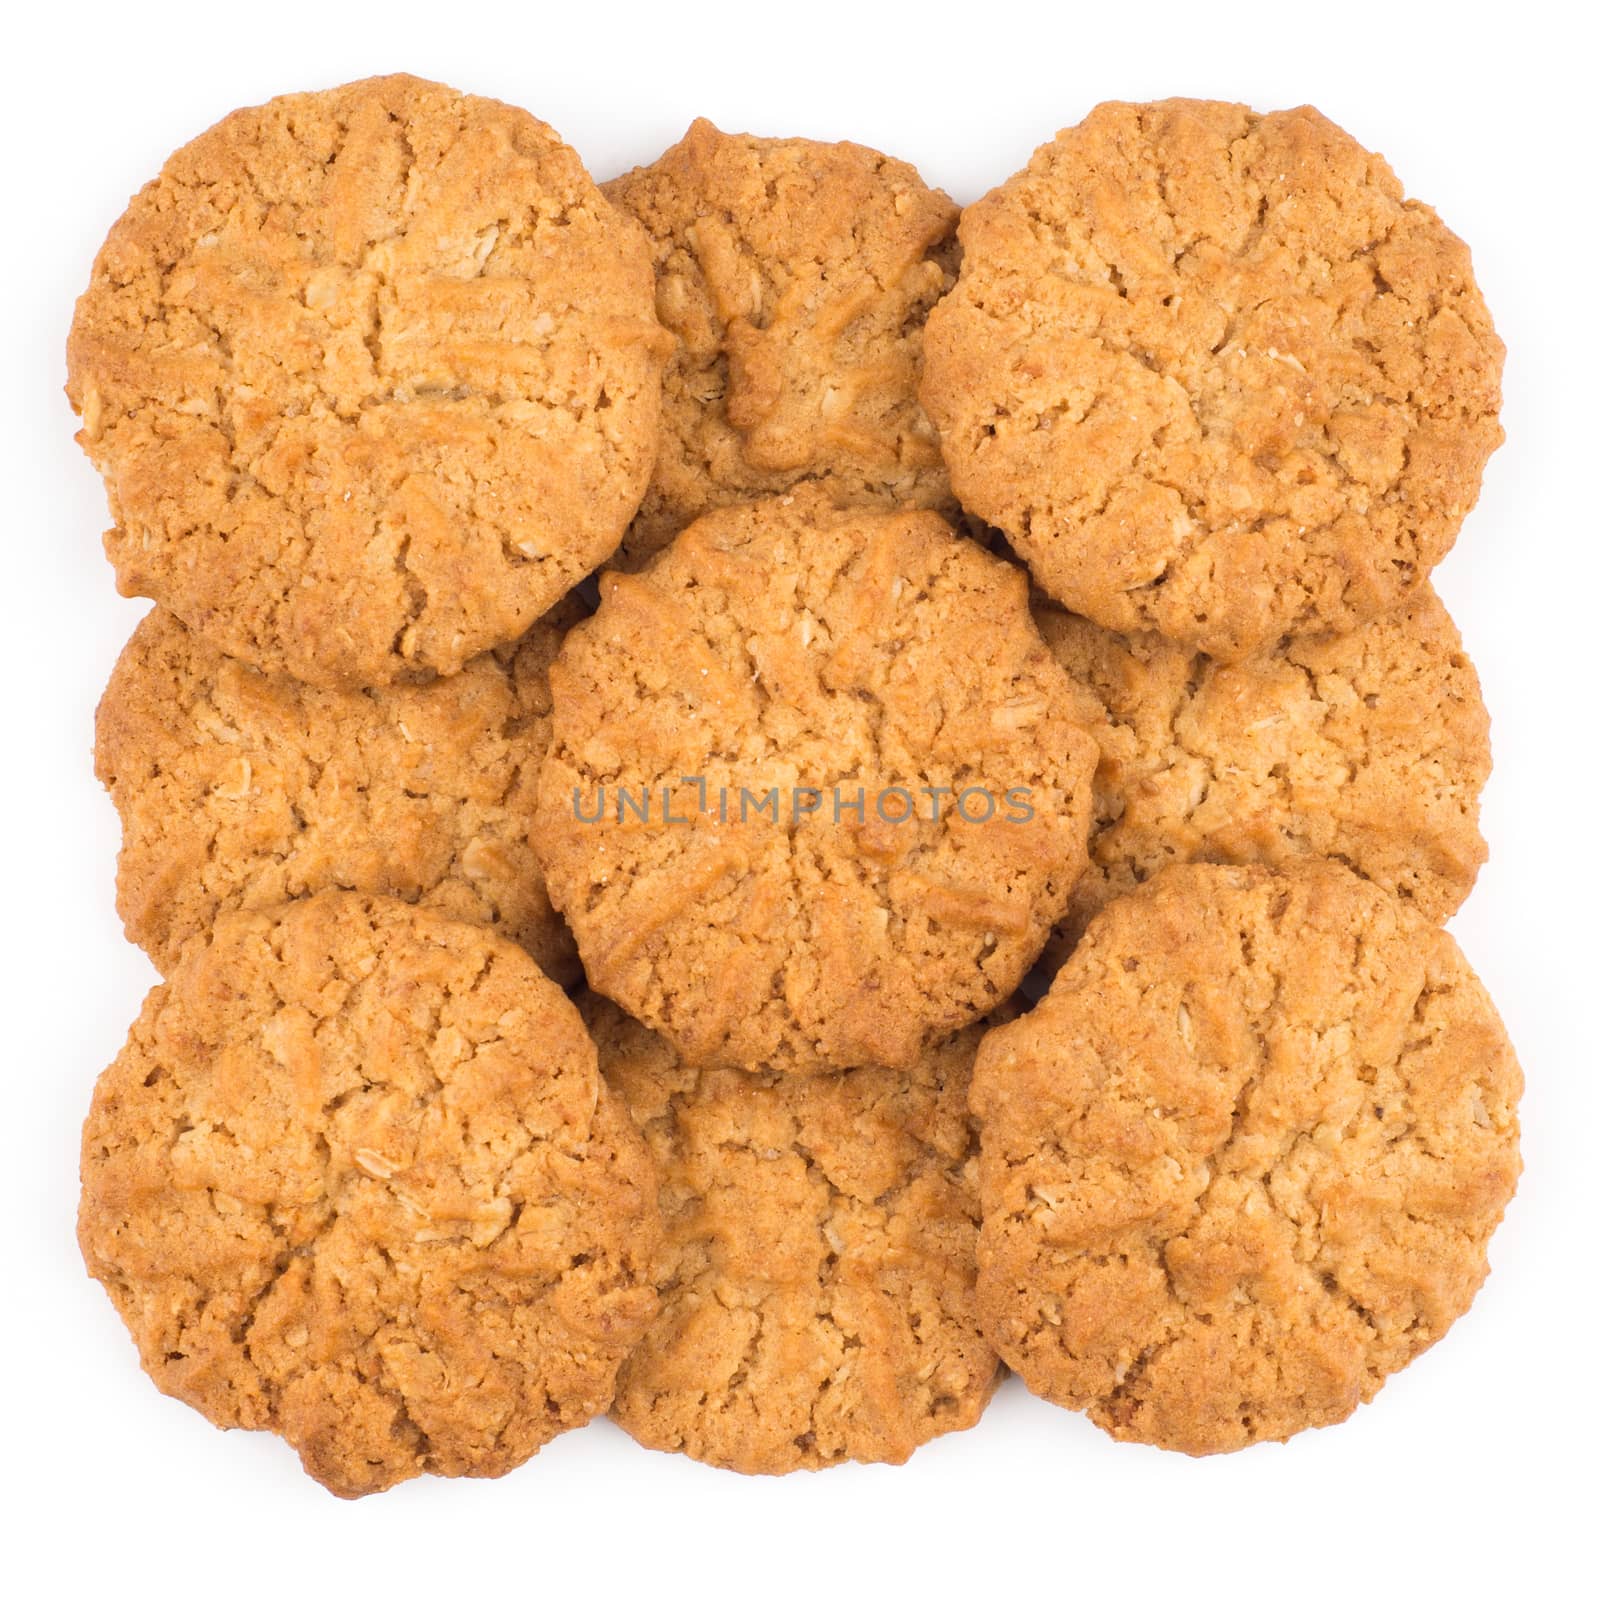 Cookies on a white background. Top view.